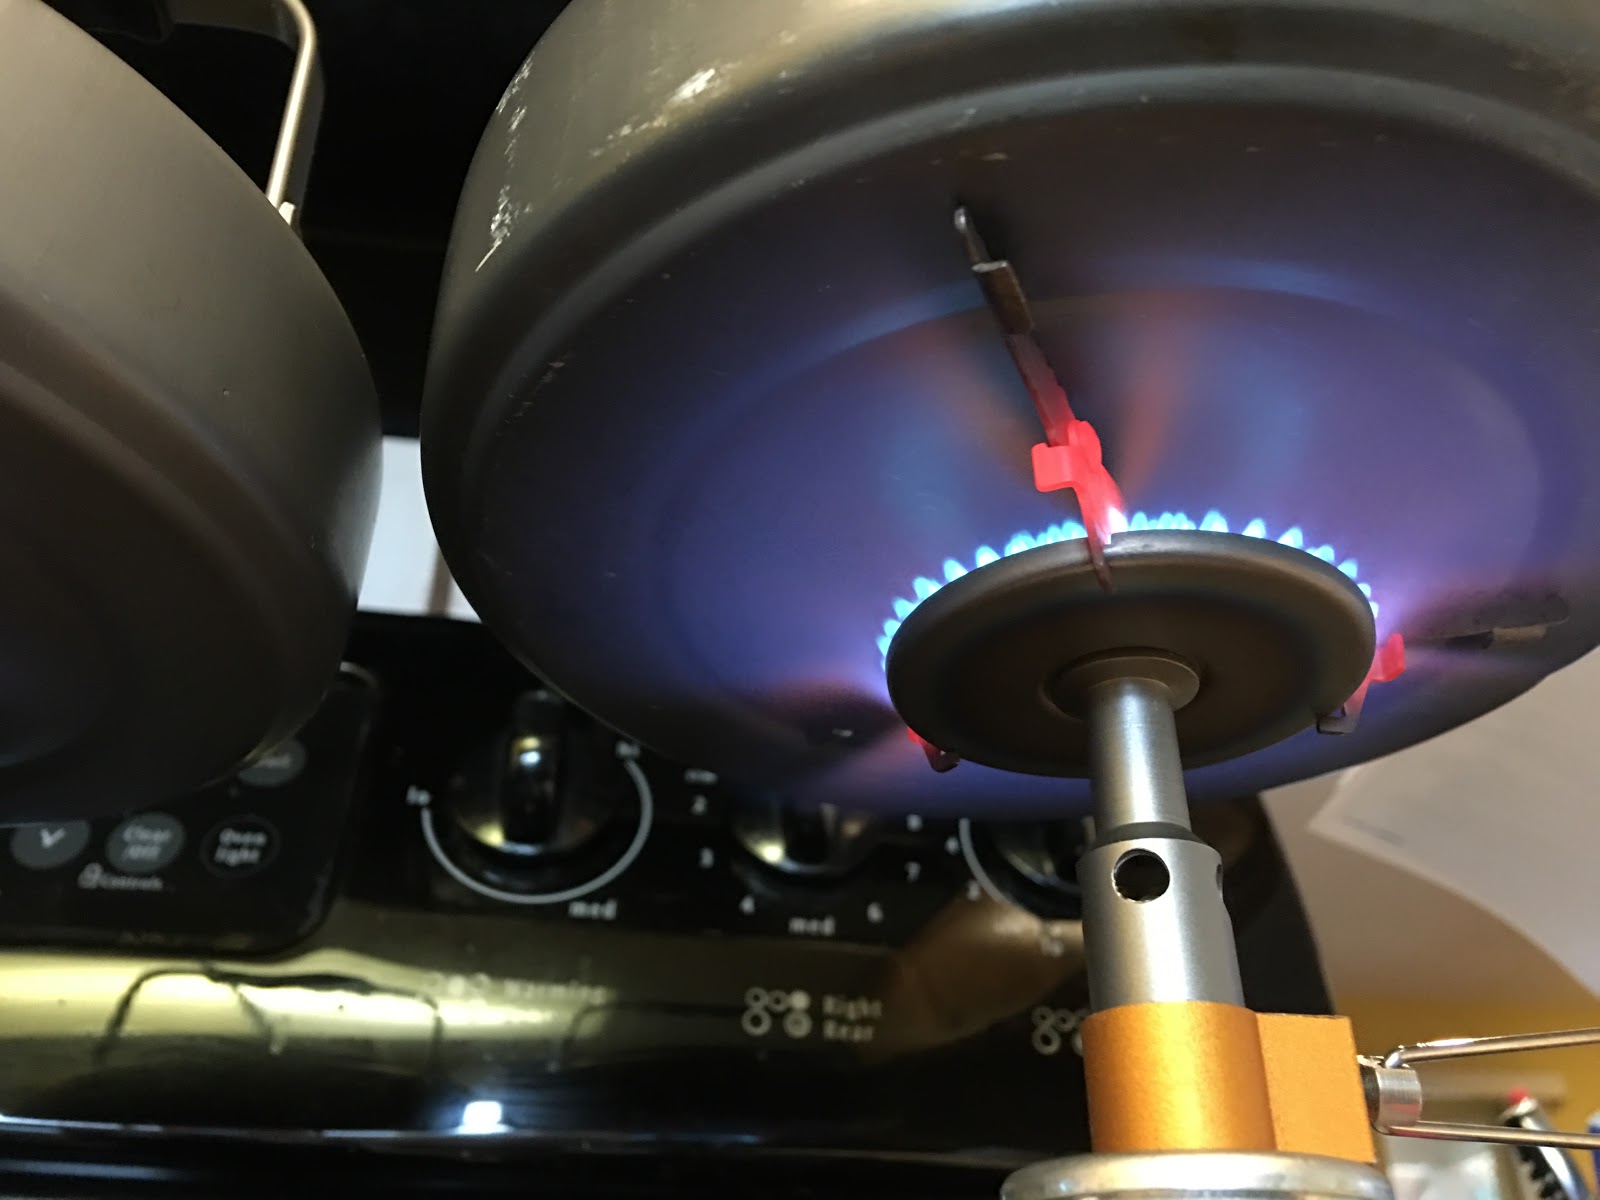 Gear talk: Fire Maple FMS-116 and FMS-116T gas stoves – Three